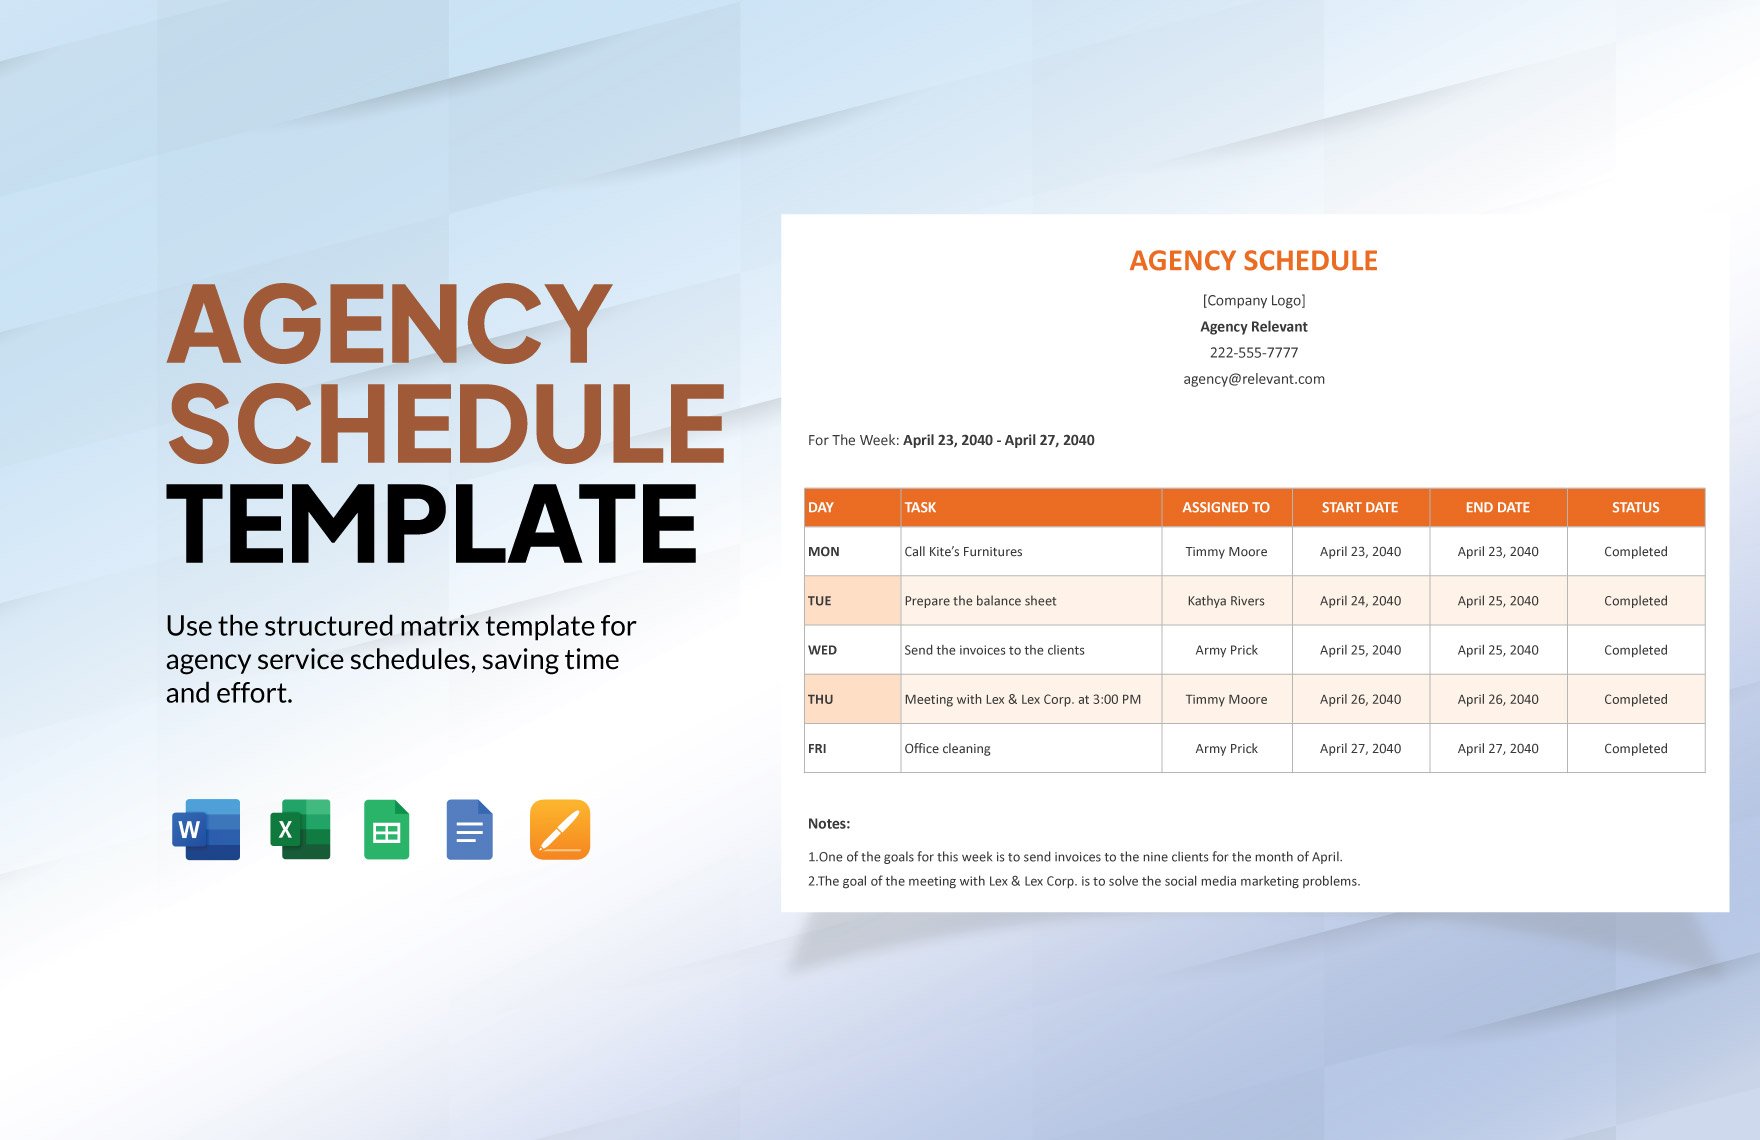 Agency Schedule Template in Word, Google Docs, Excel, Google Sheets, Apple Pages